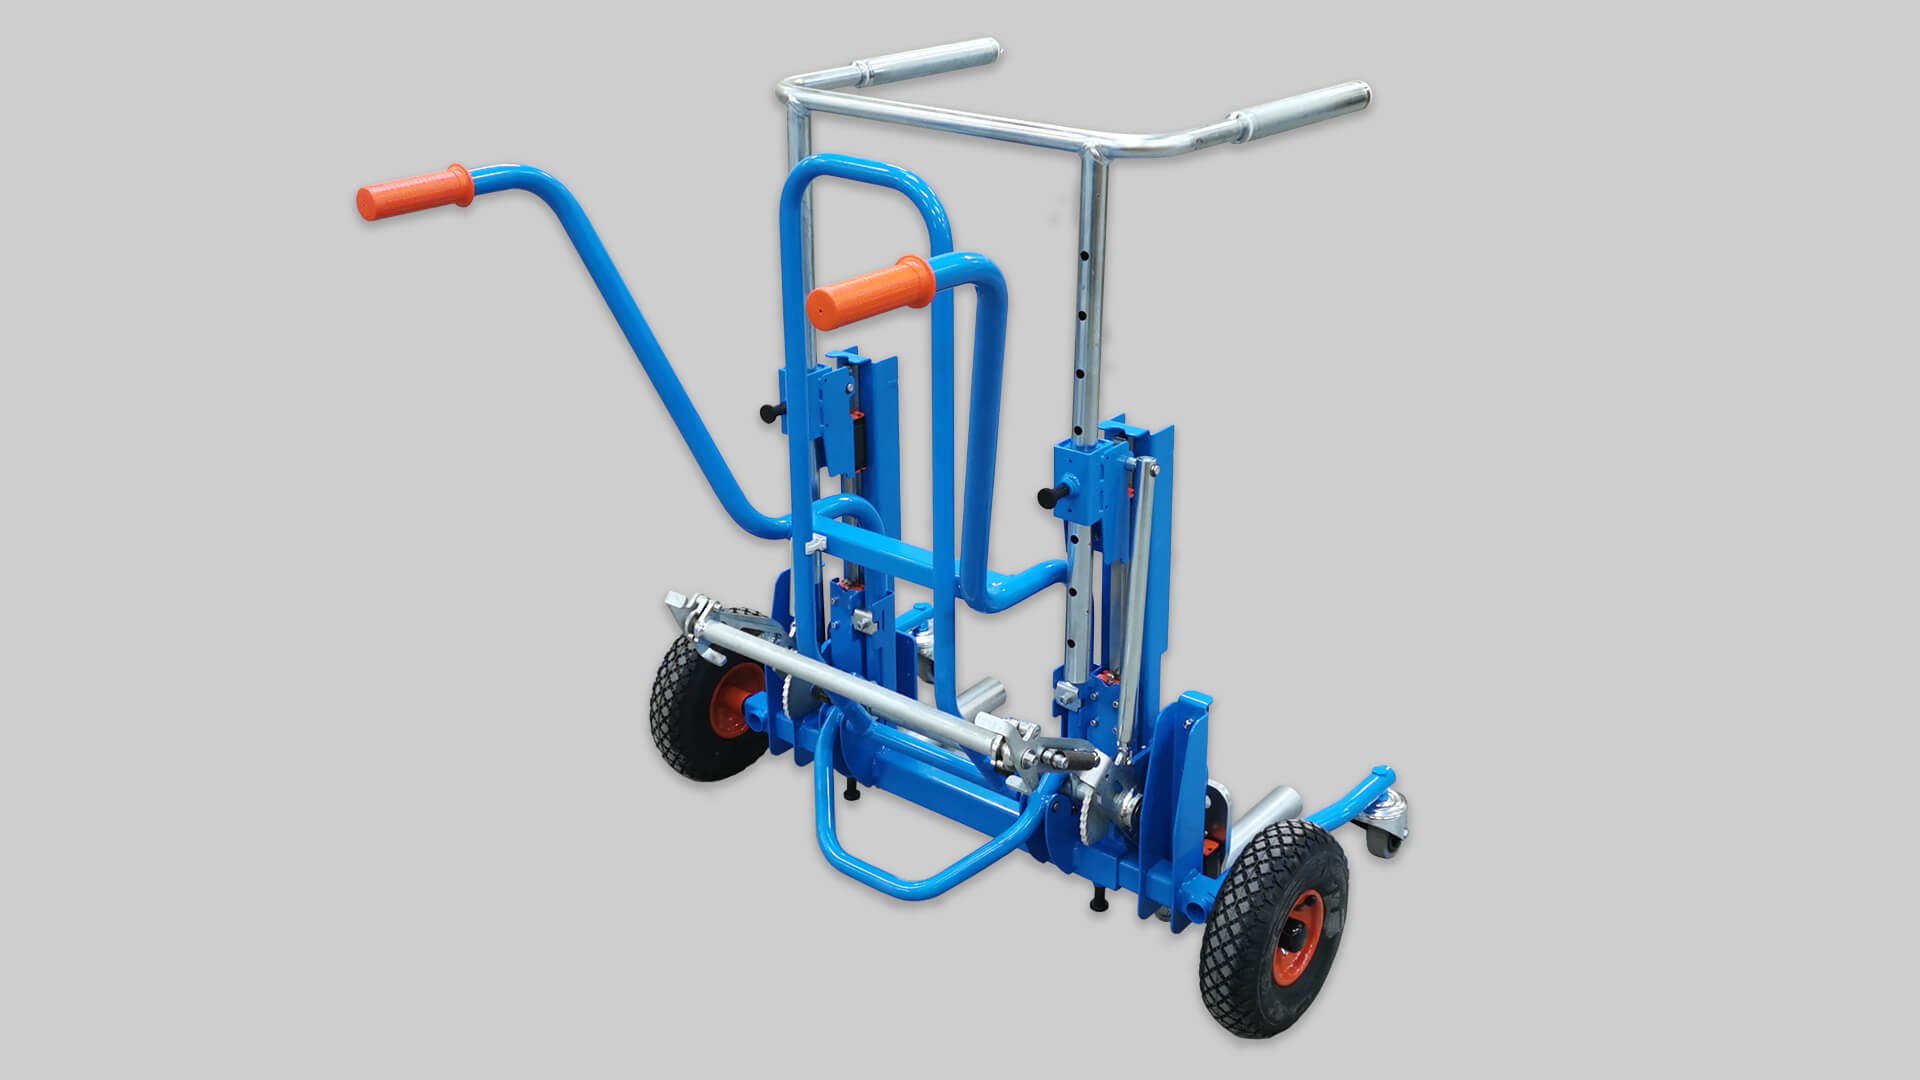 Easy Truck Trolley is easy to manoeuvre around the workshop with the four smooth-running wheels